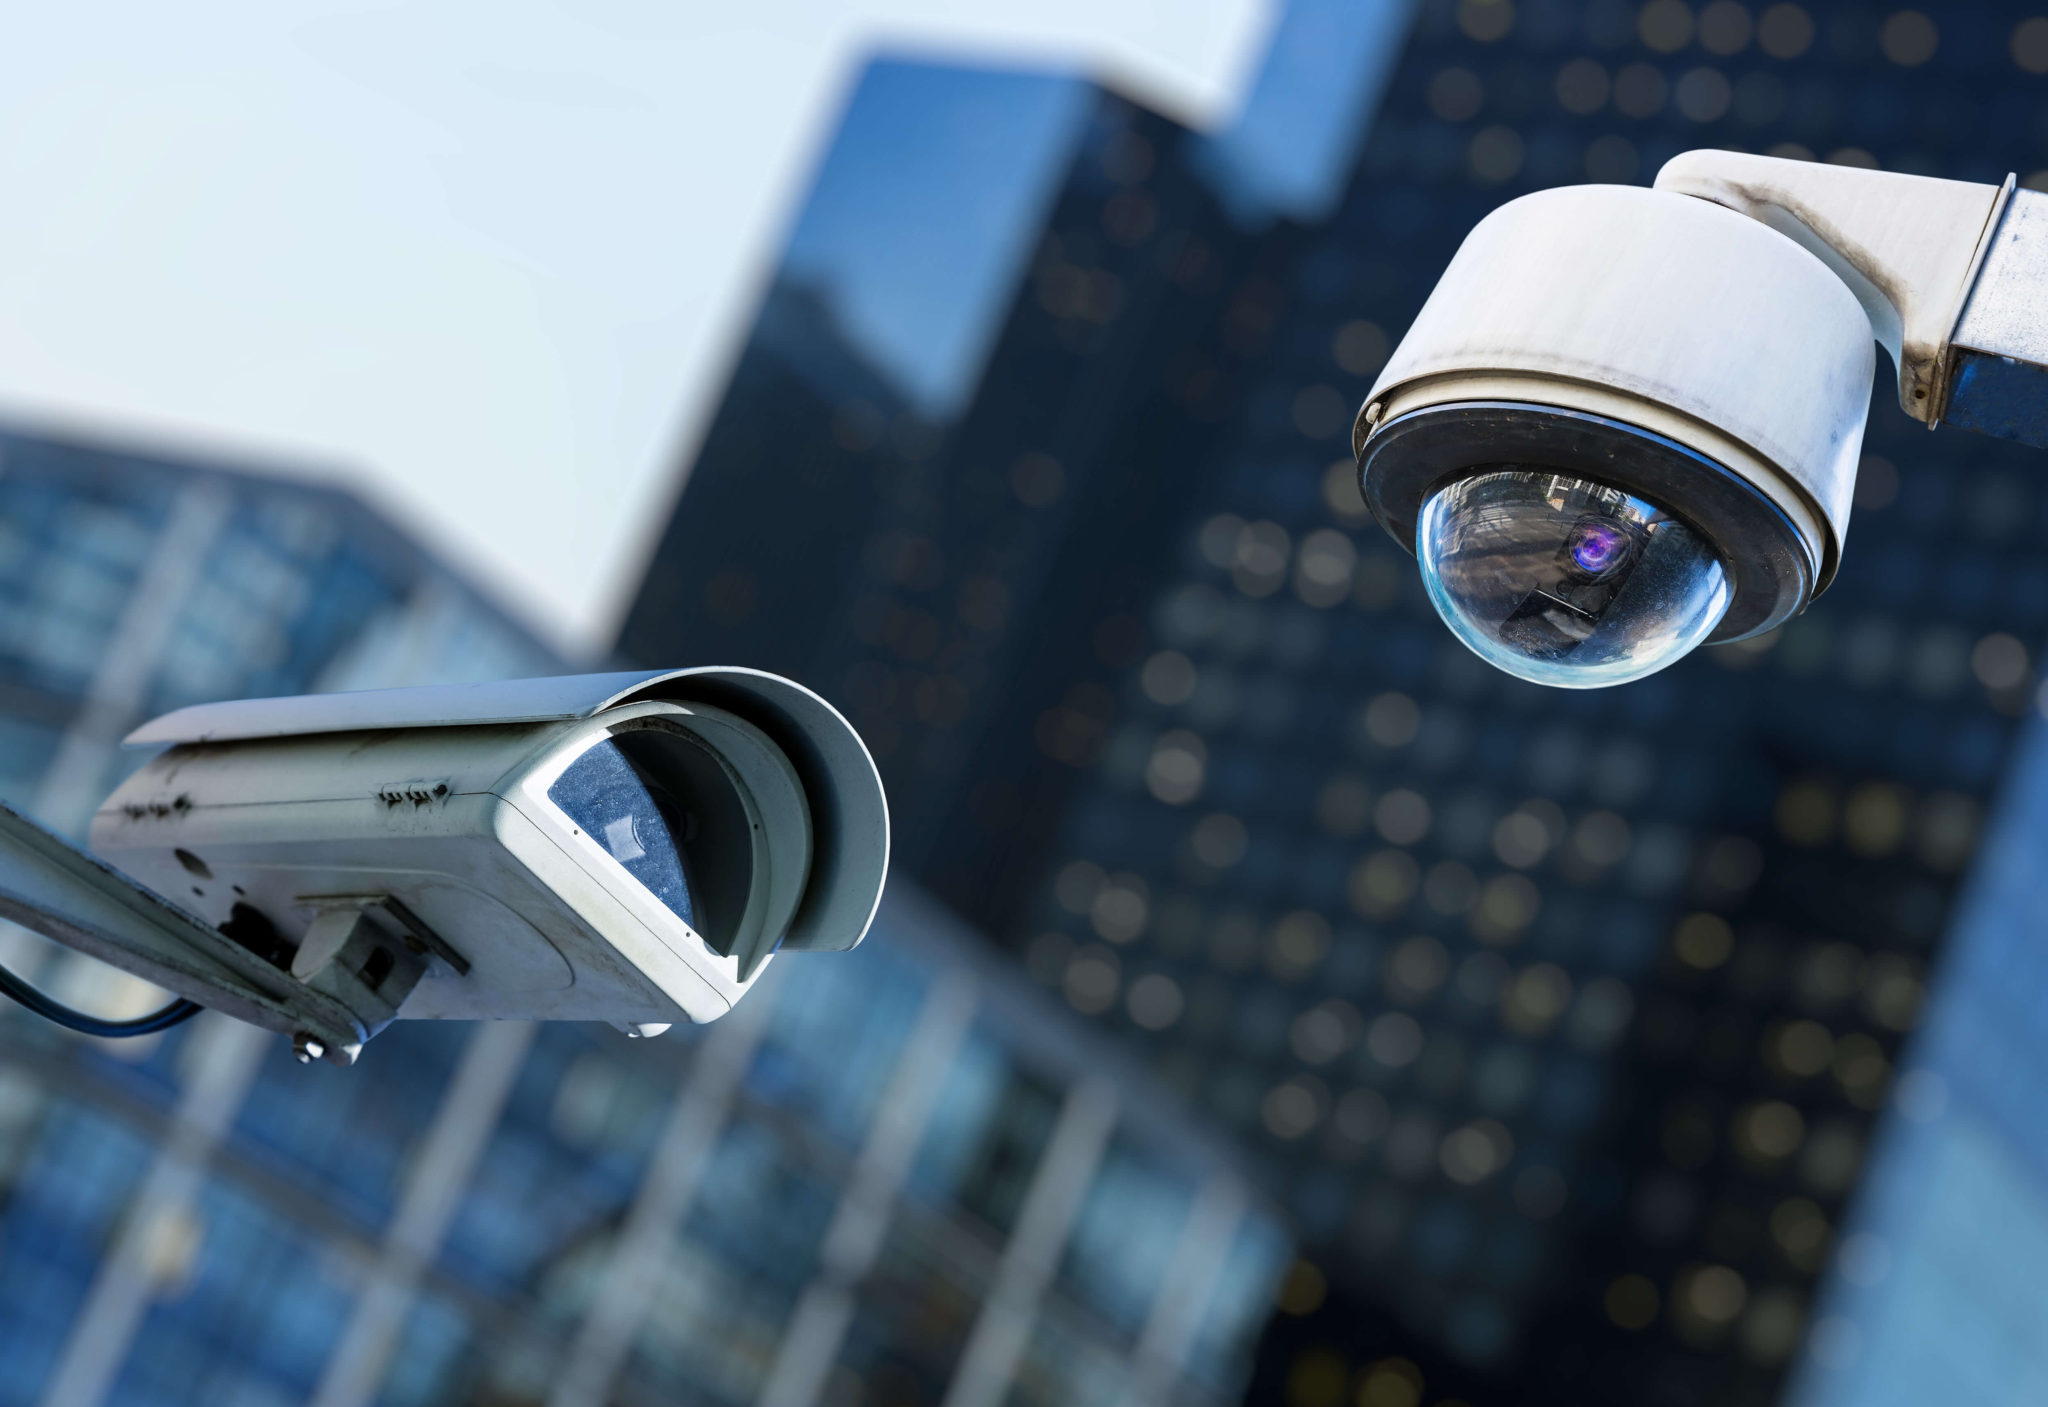 How To Hack Into Security Cameras